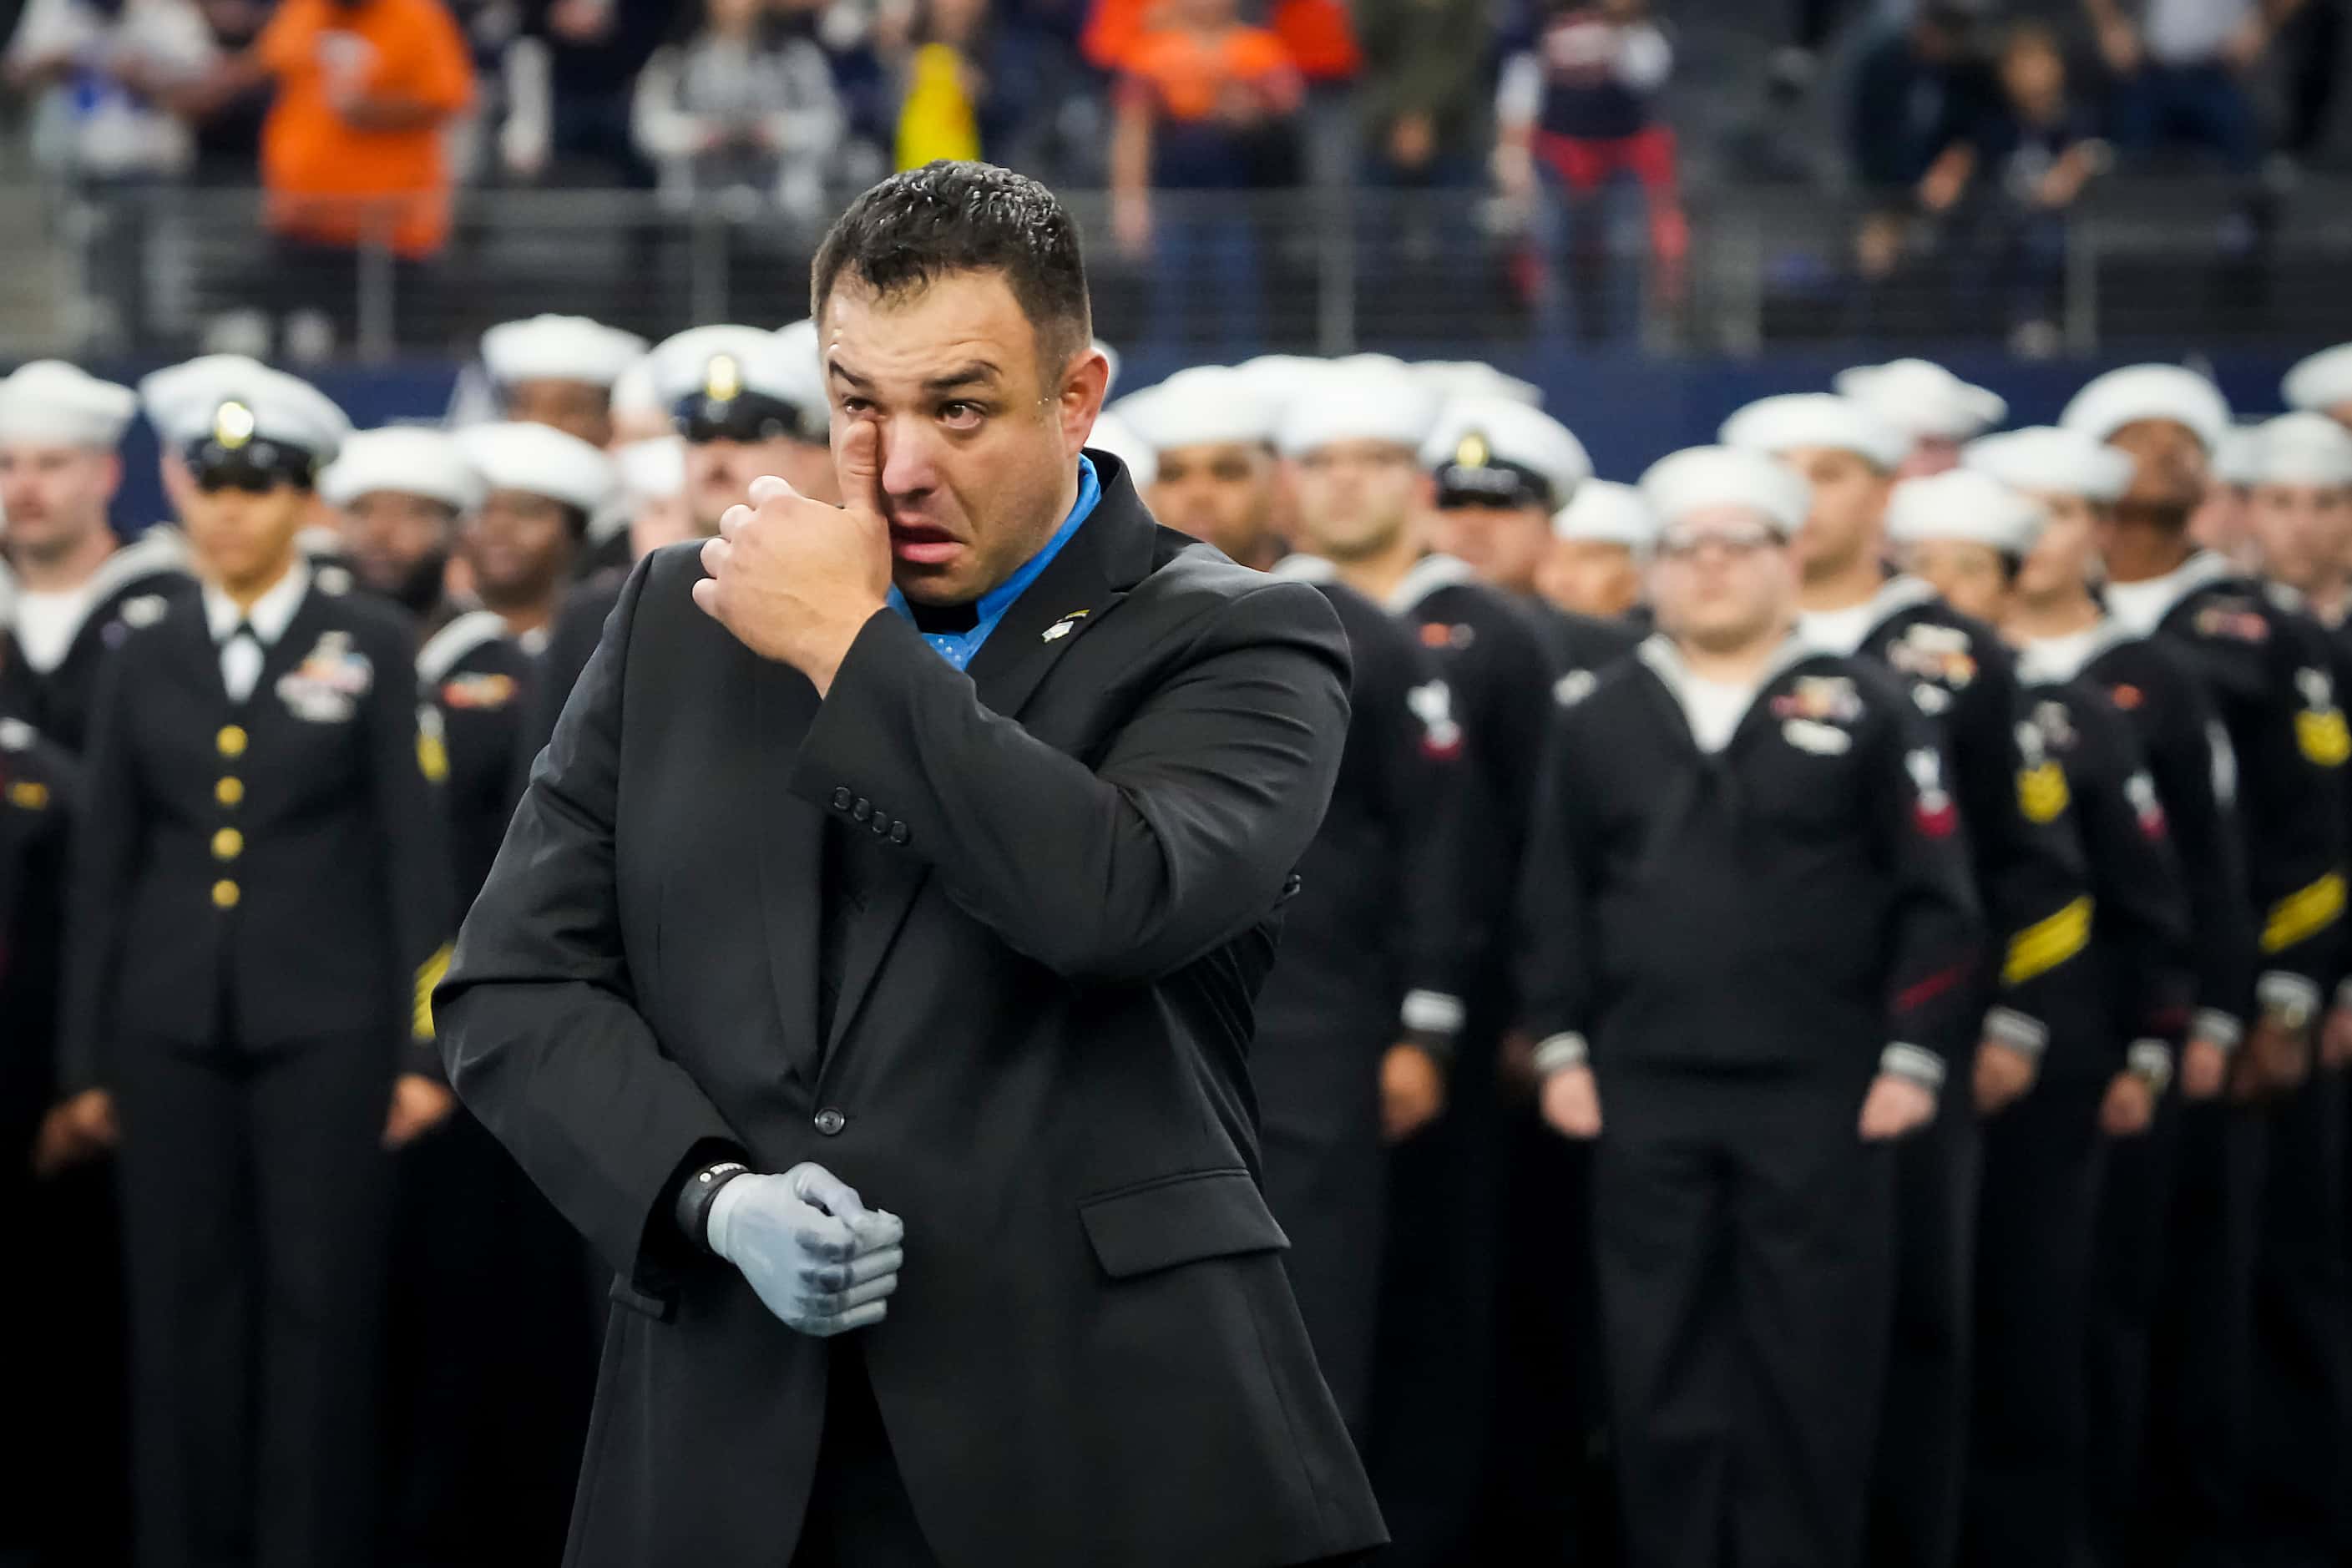 Medal of Honor recipient U.S. Army Master Sergeant Major Leroy Petry wipes away a tear as...